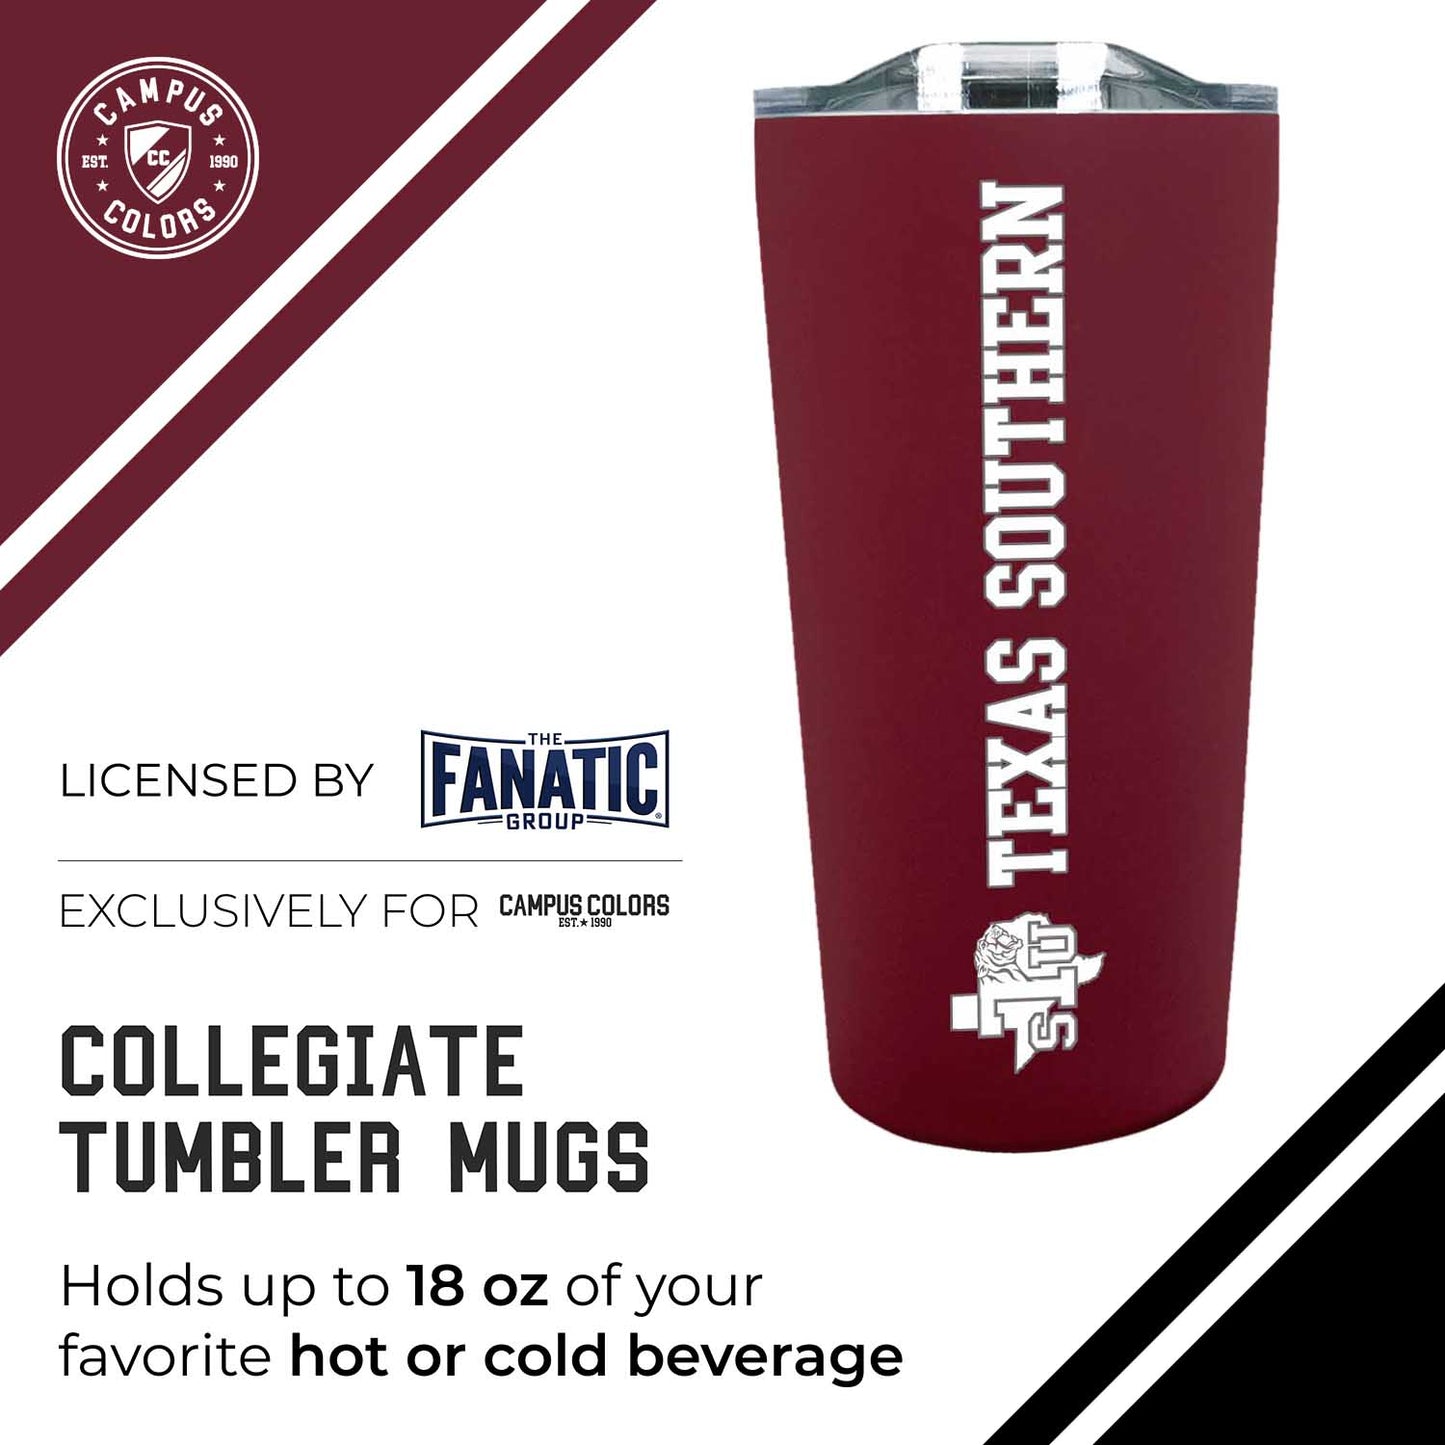 Texas Southern University NCAA Stainless Steel Tumbler perfect for Gameday - Maroon